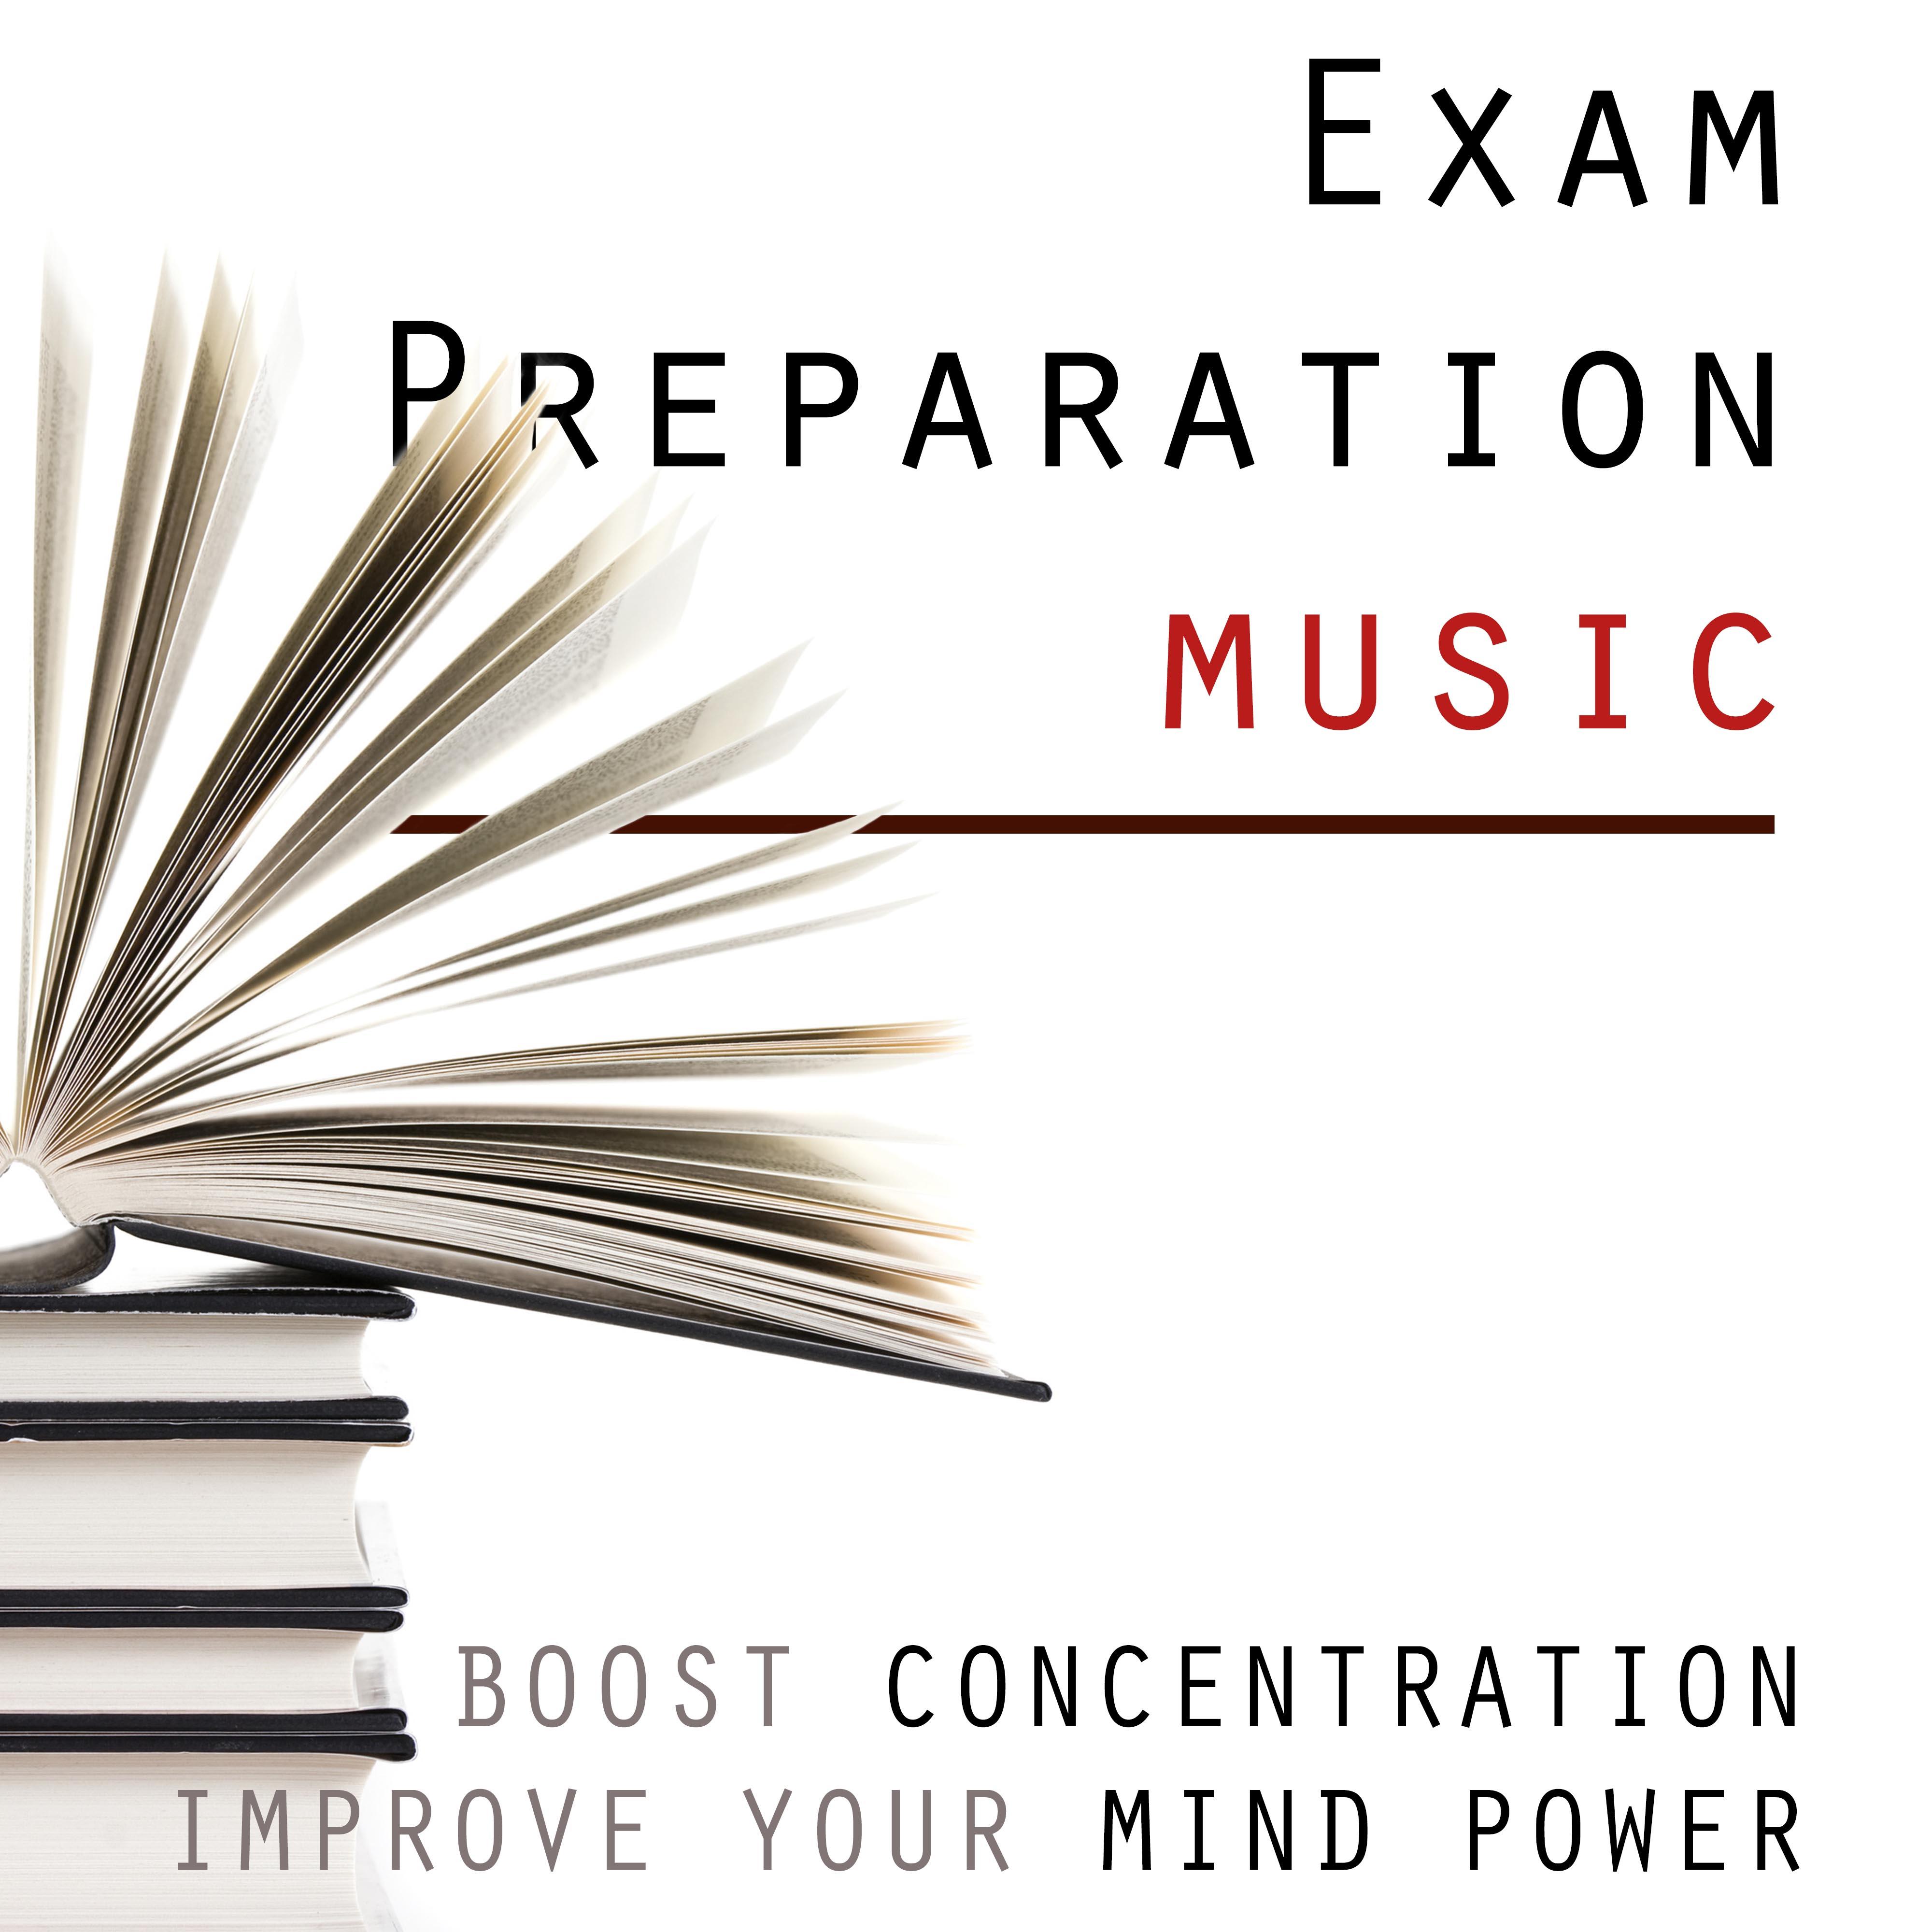 Exam Preparation Music - New Age Vibes to Boost Concentration and Improve your Mind Power